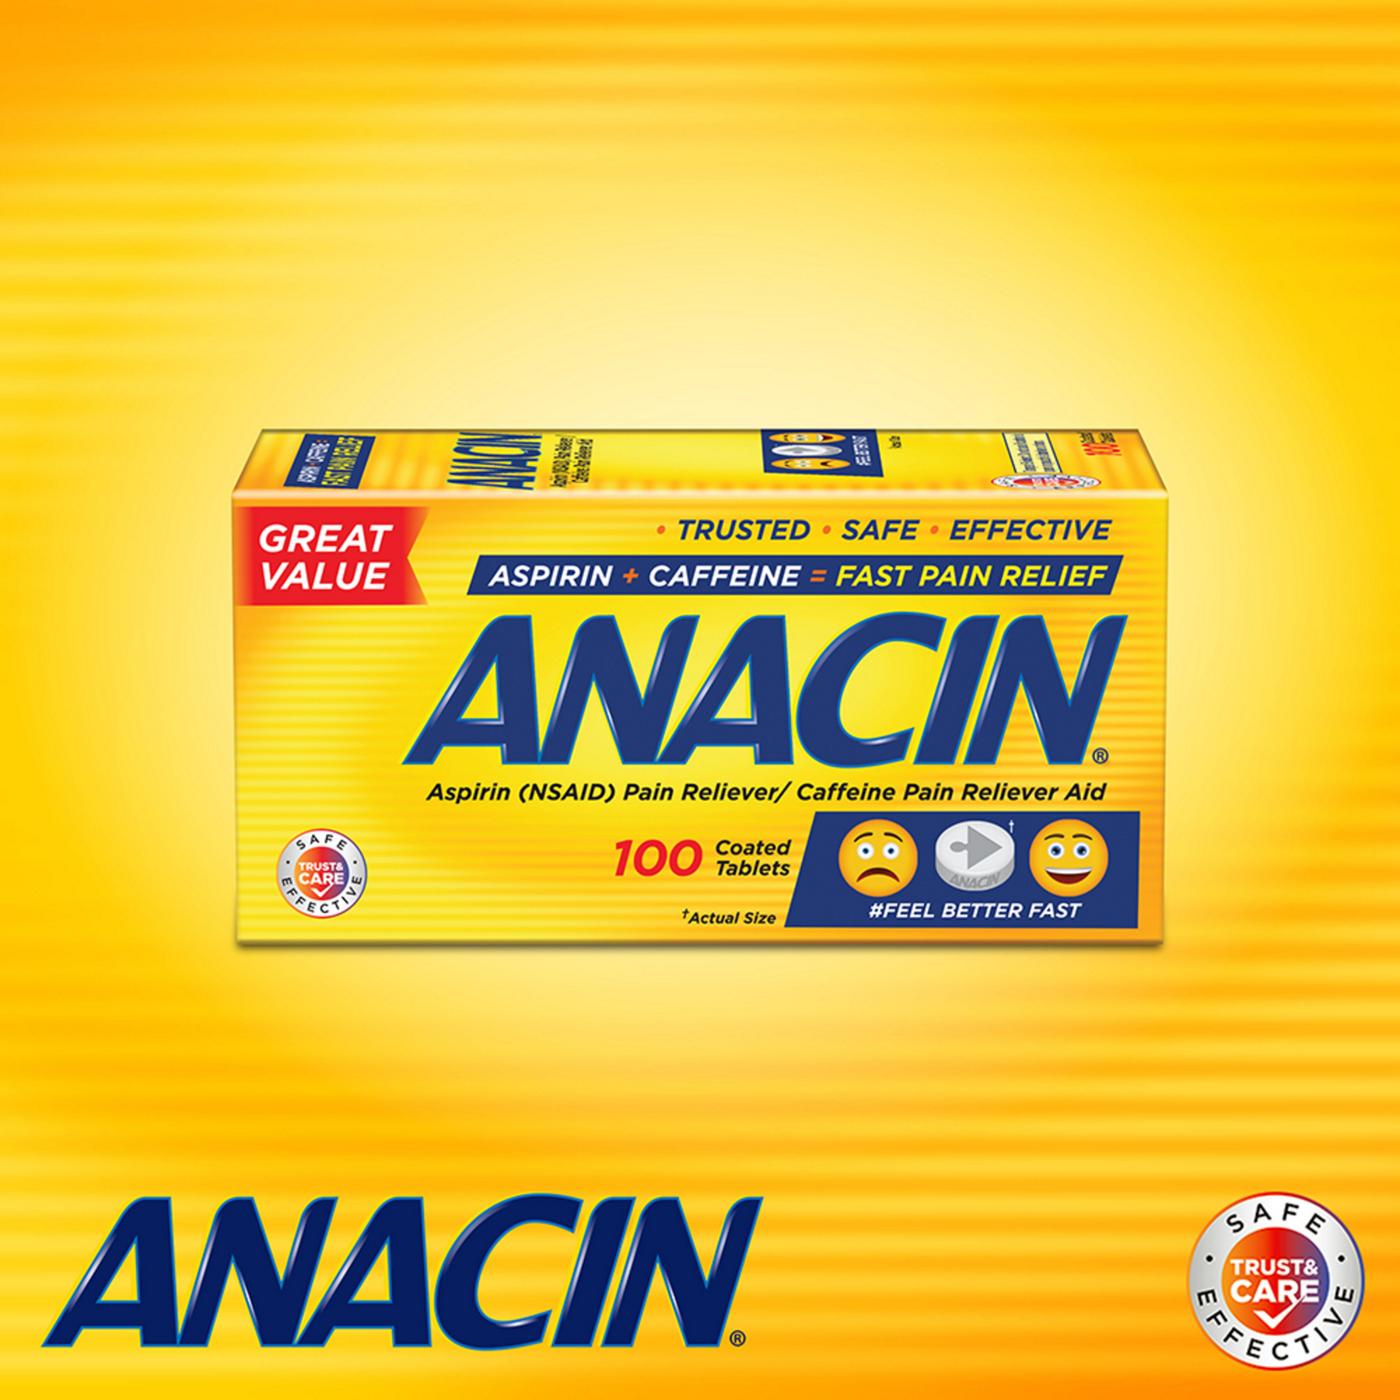 Anacin Fast Pain Reliever Coated Tablets; image 5 of 5